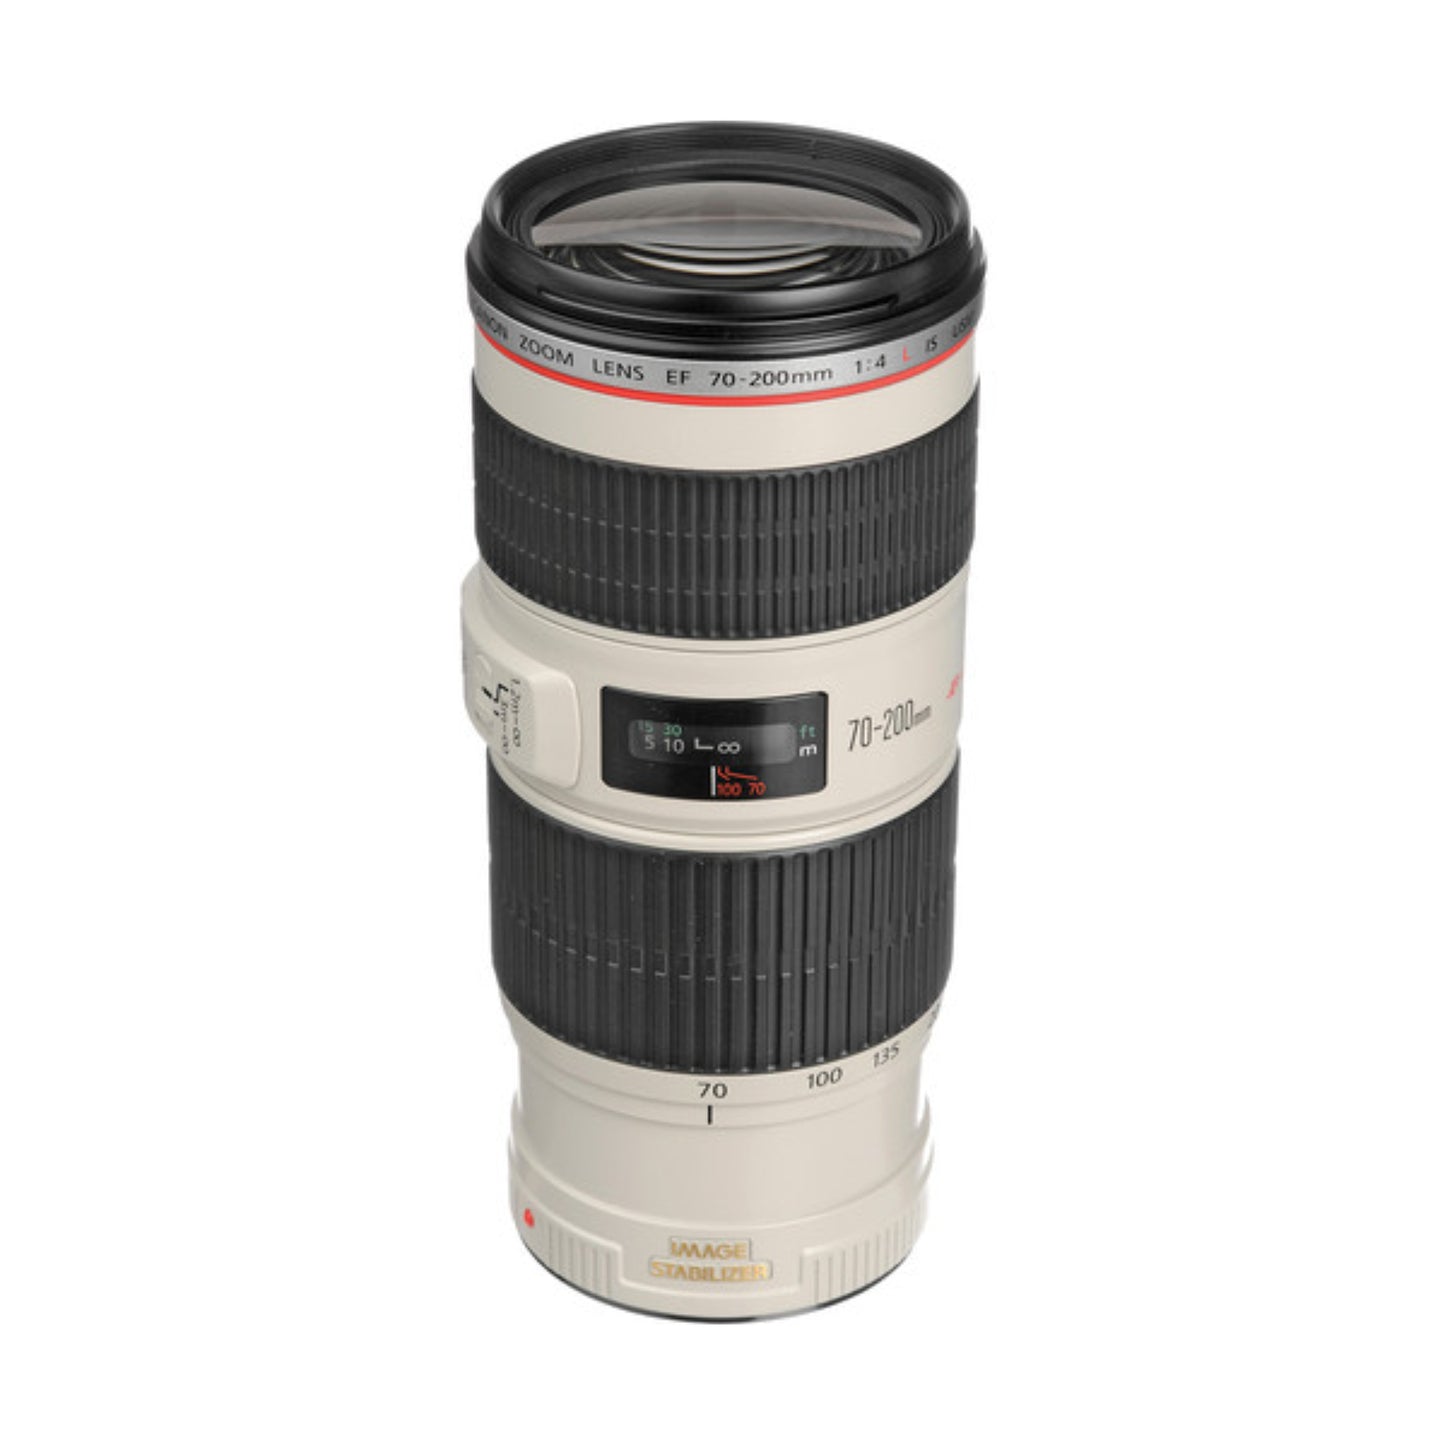 Canon 70 - 200mm f 4 ef lens for hire at Topic Rentals